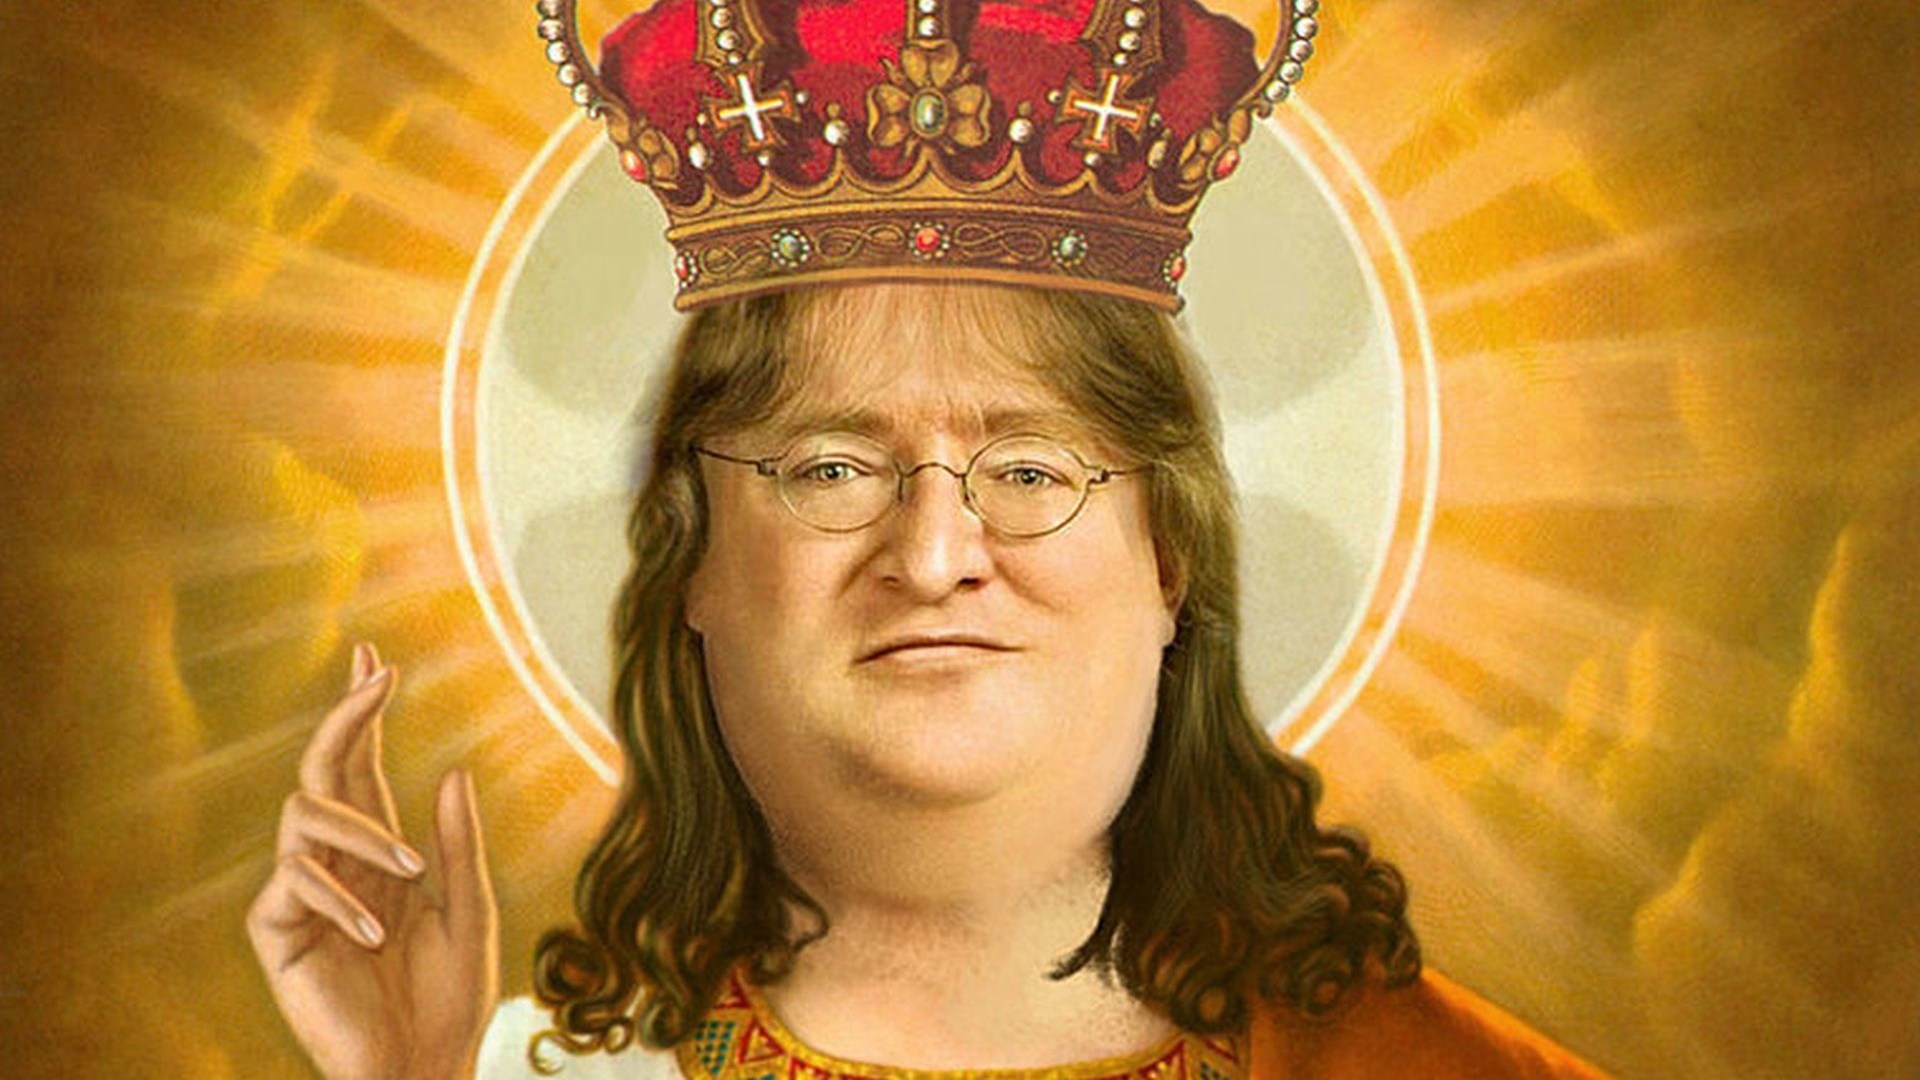 Gabe Newell is playing 'a ton' of Final Fantasy 14 on the Steam Deck